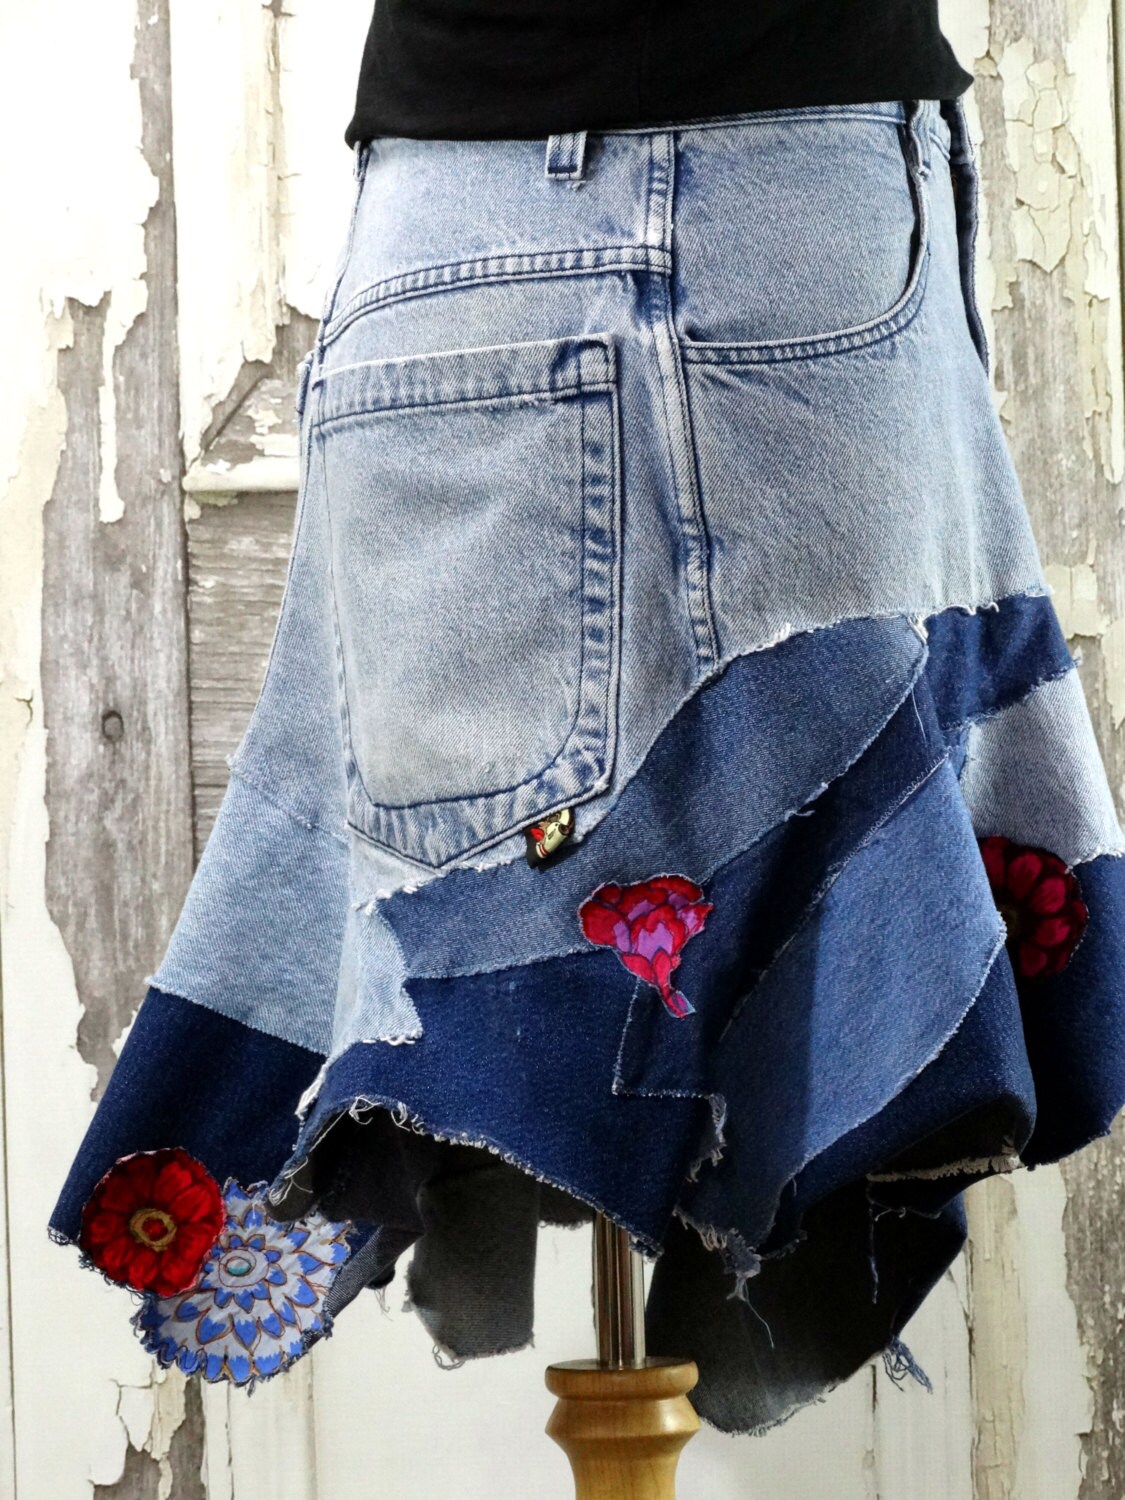 Upcycled Recycled Jean Skirt Upcycled Clothing Wearable Art by